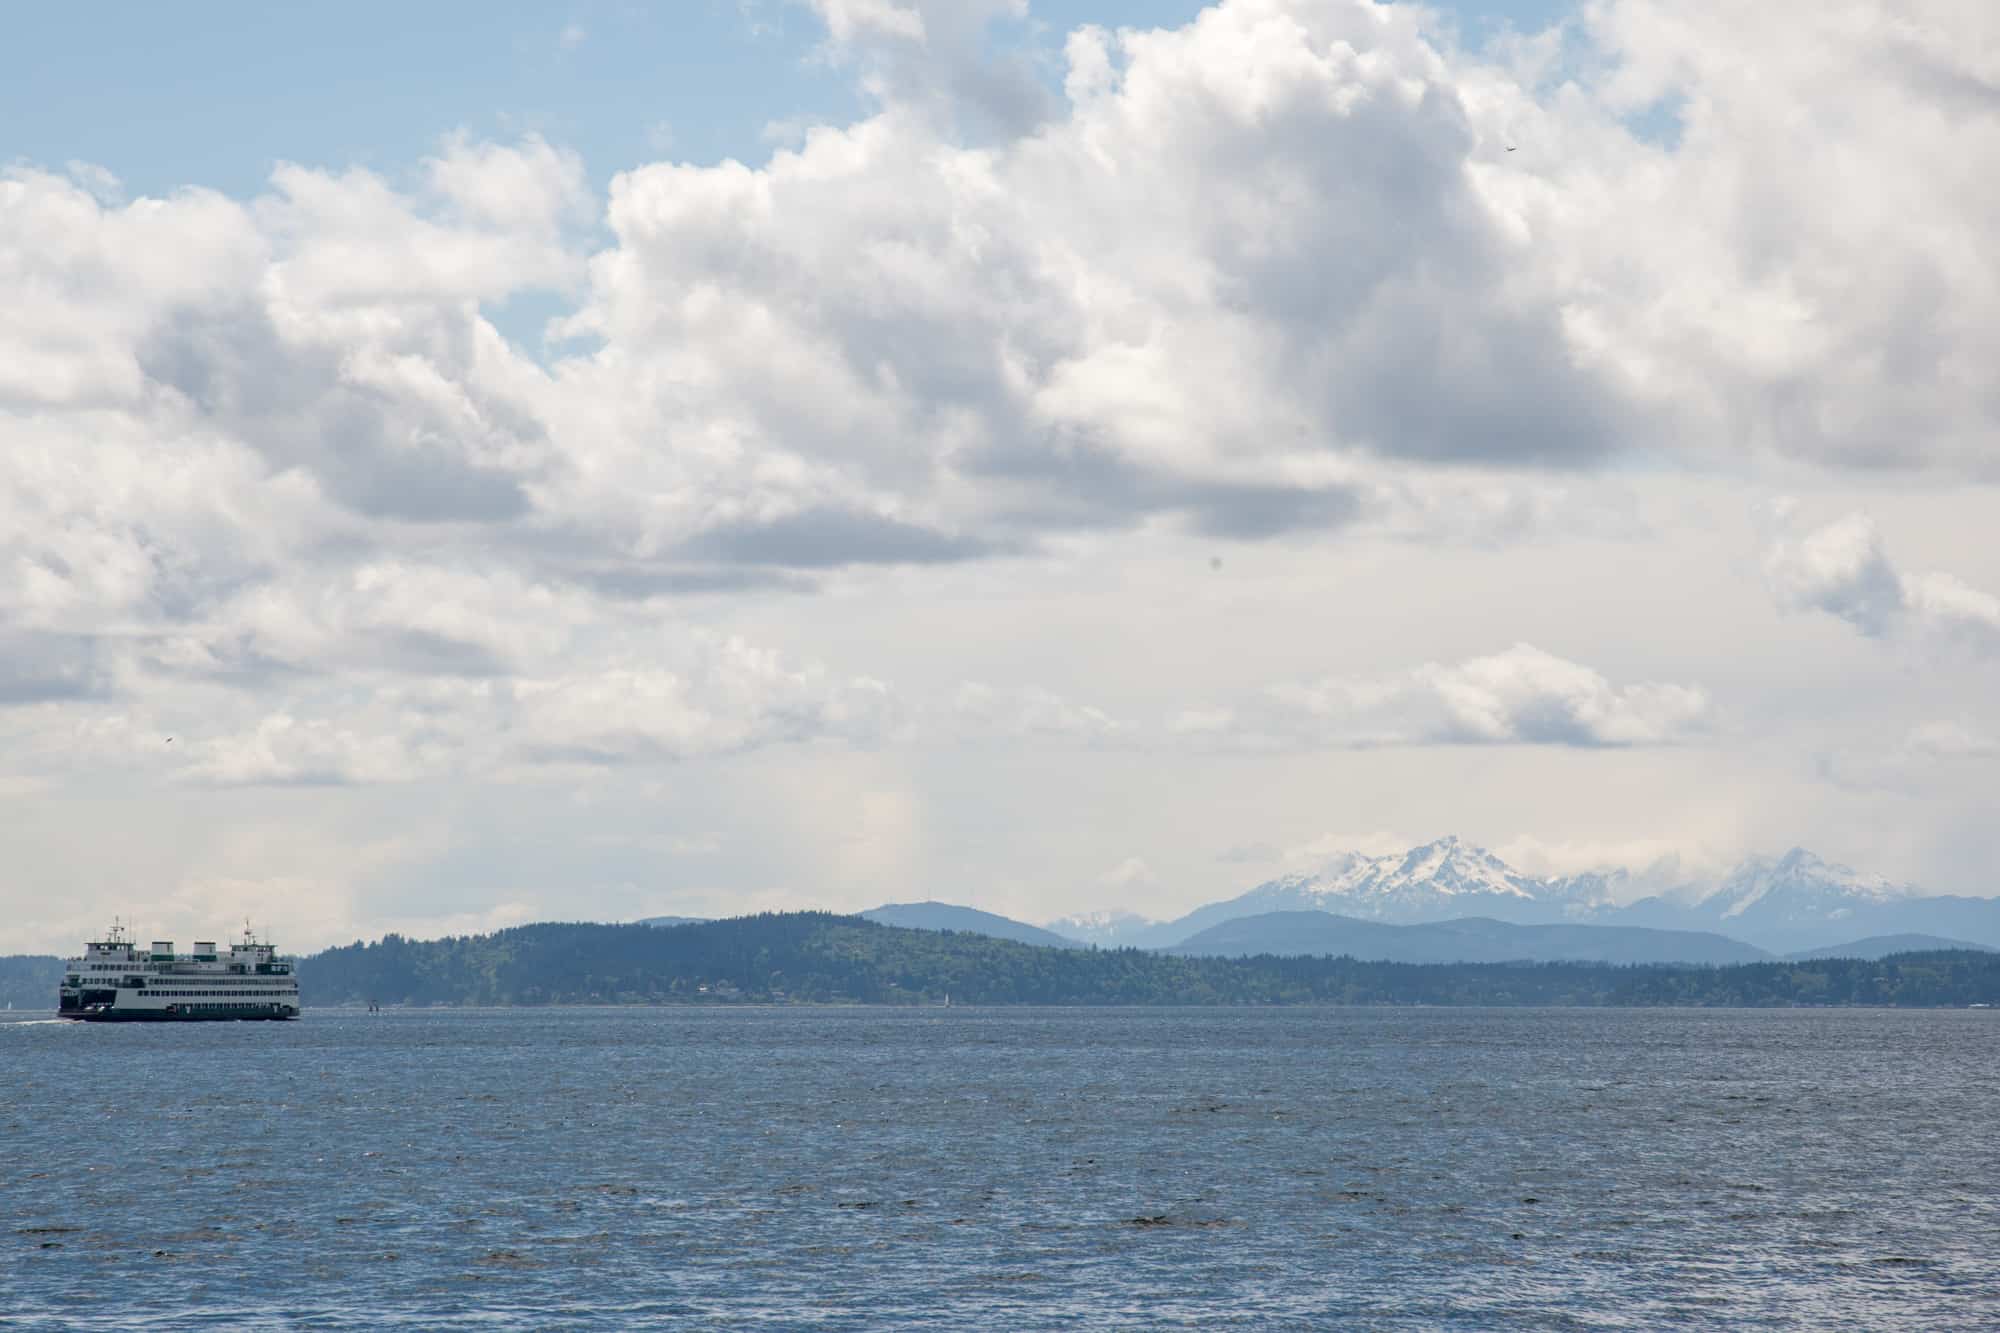 a ferry on the water in puget sound by seattle, in the distance you can see land and mountains